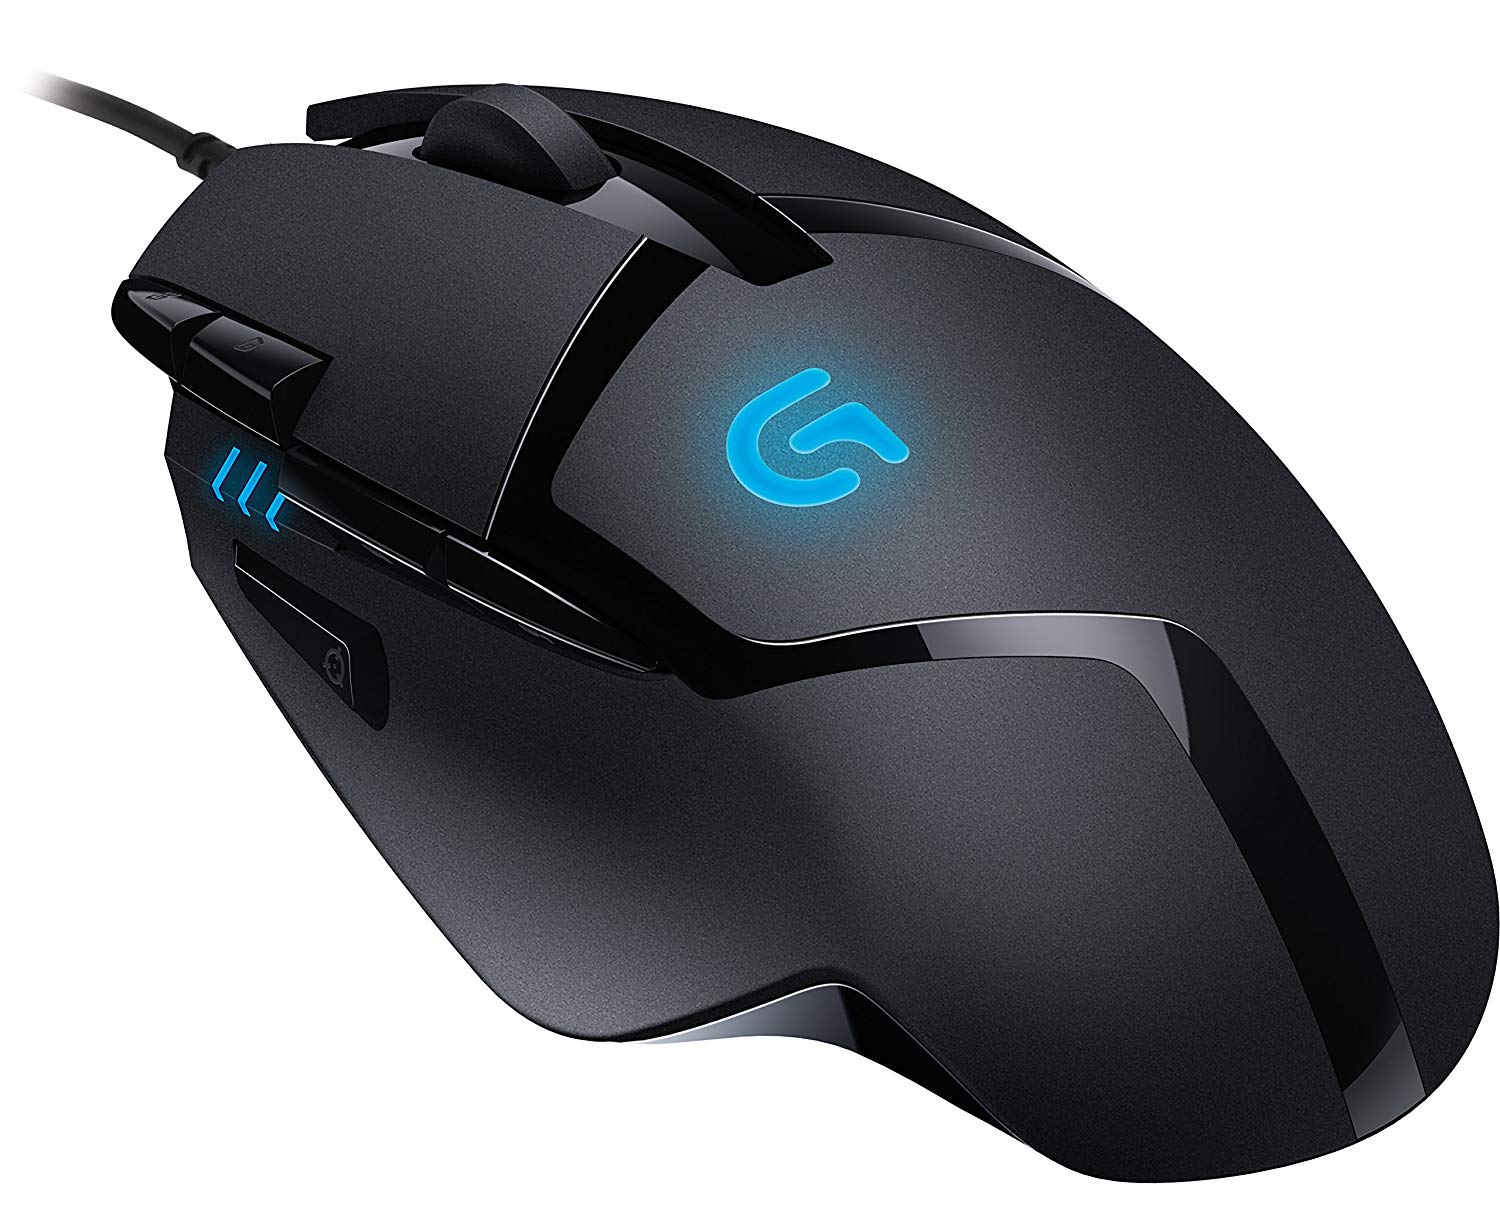 Logitech G402 Hyperion Fury Fps Gaming Mouse - Lg G402 Hyperion Fury , HD Wallpaper & Backgrounds